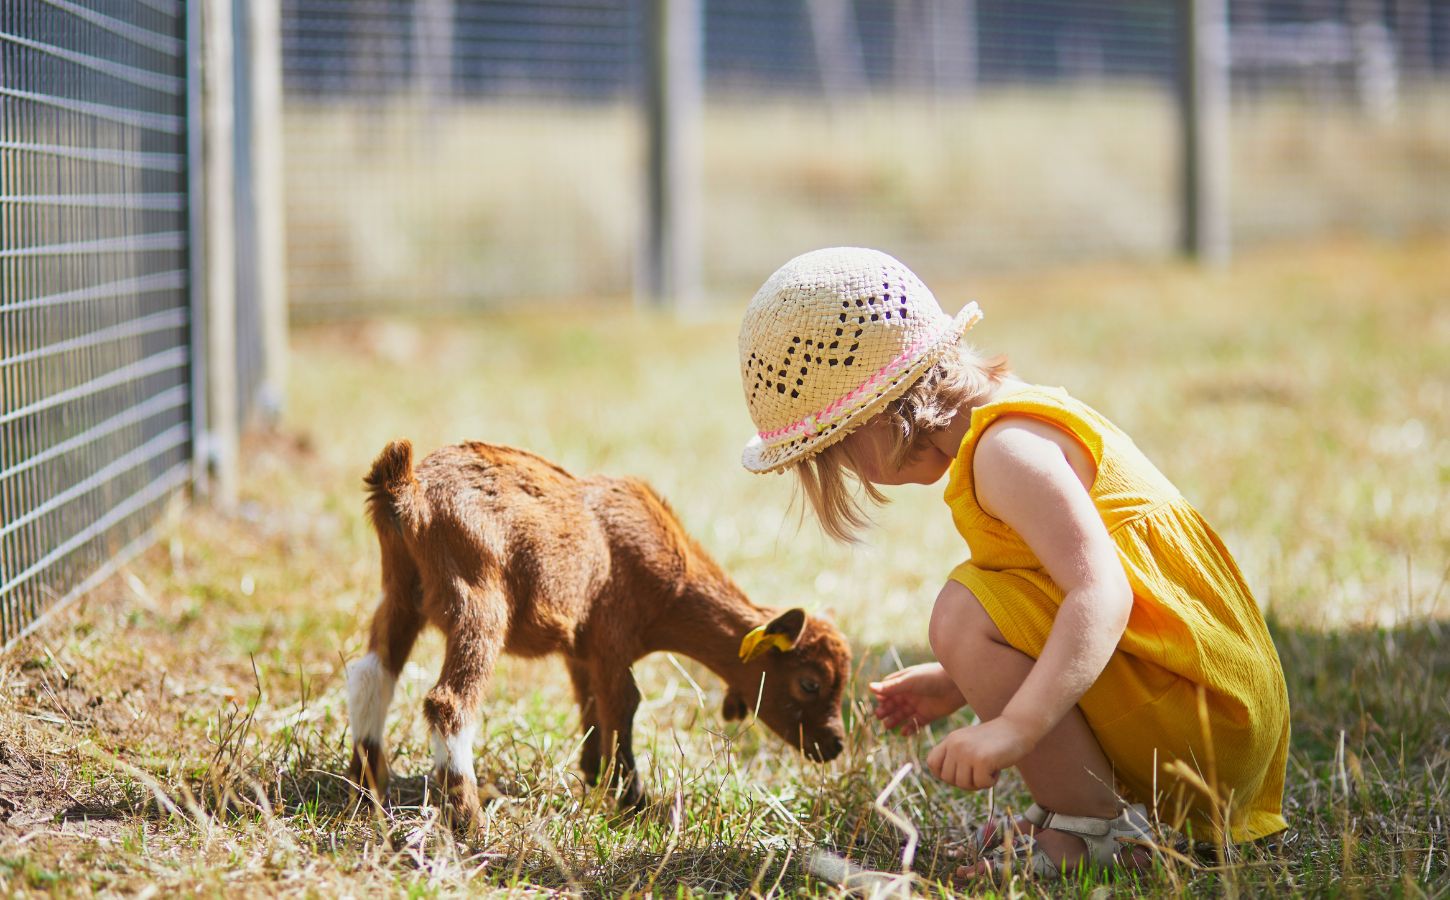 A child interacting with a young animal outside on the grass